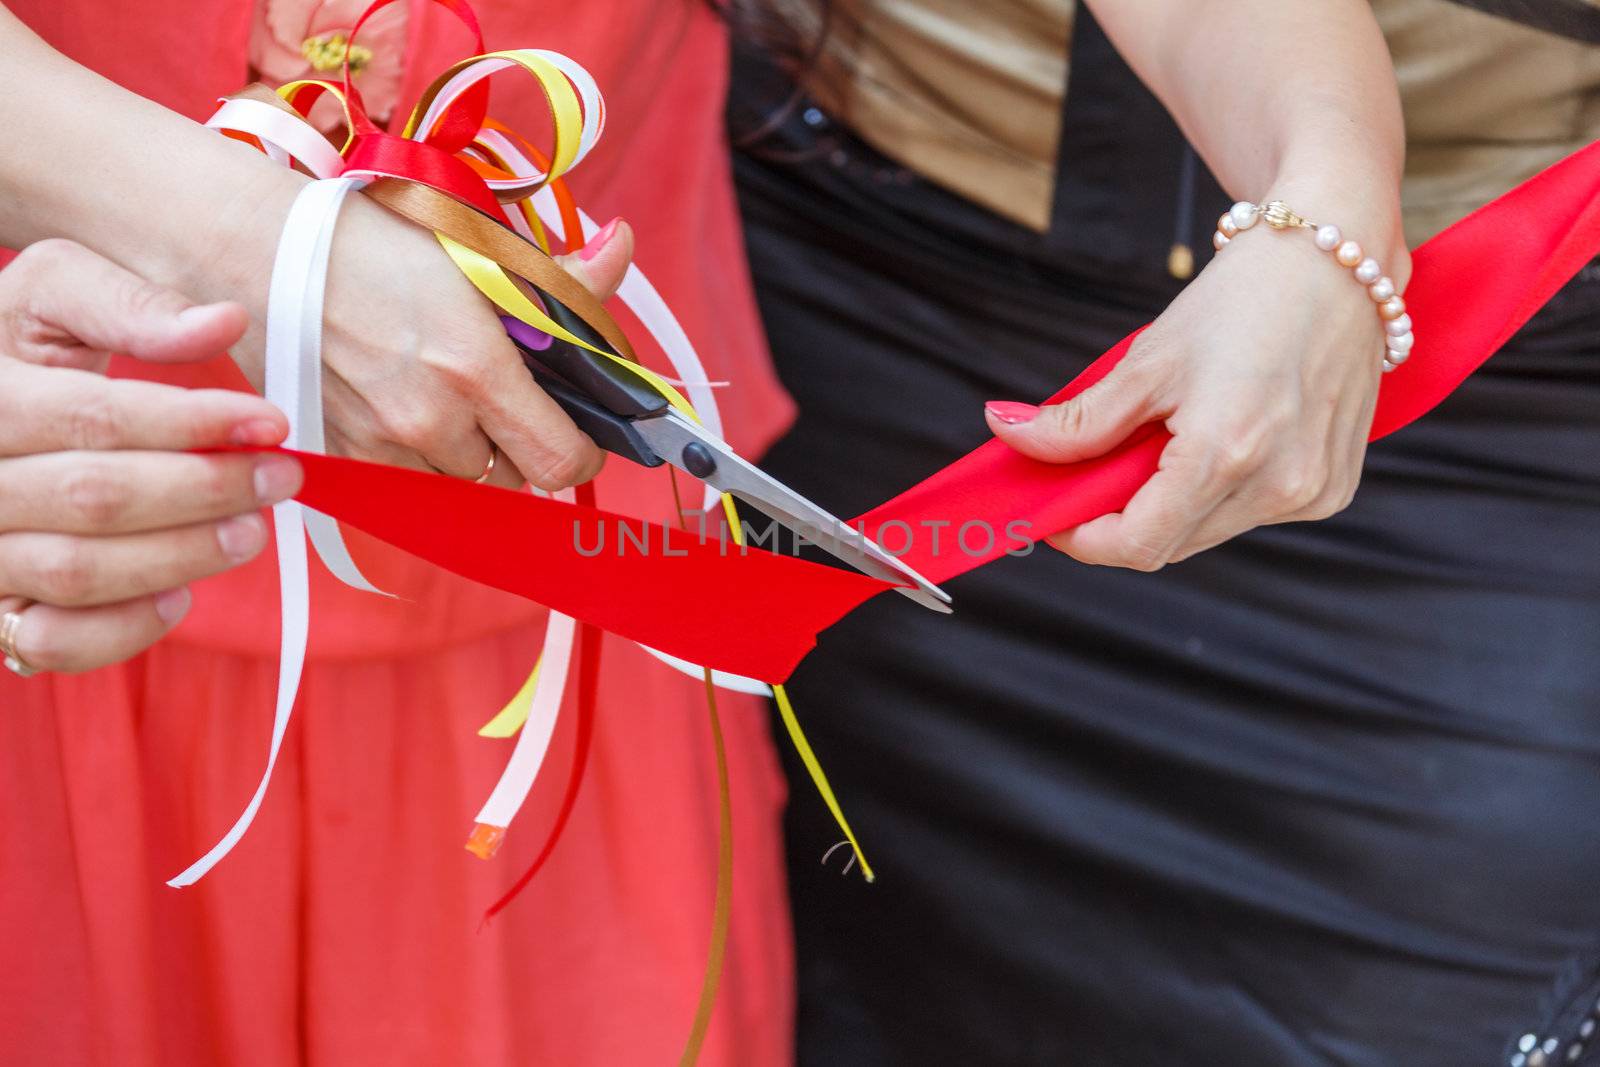 Grand opening. scissors cut the red ribbon. close-up